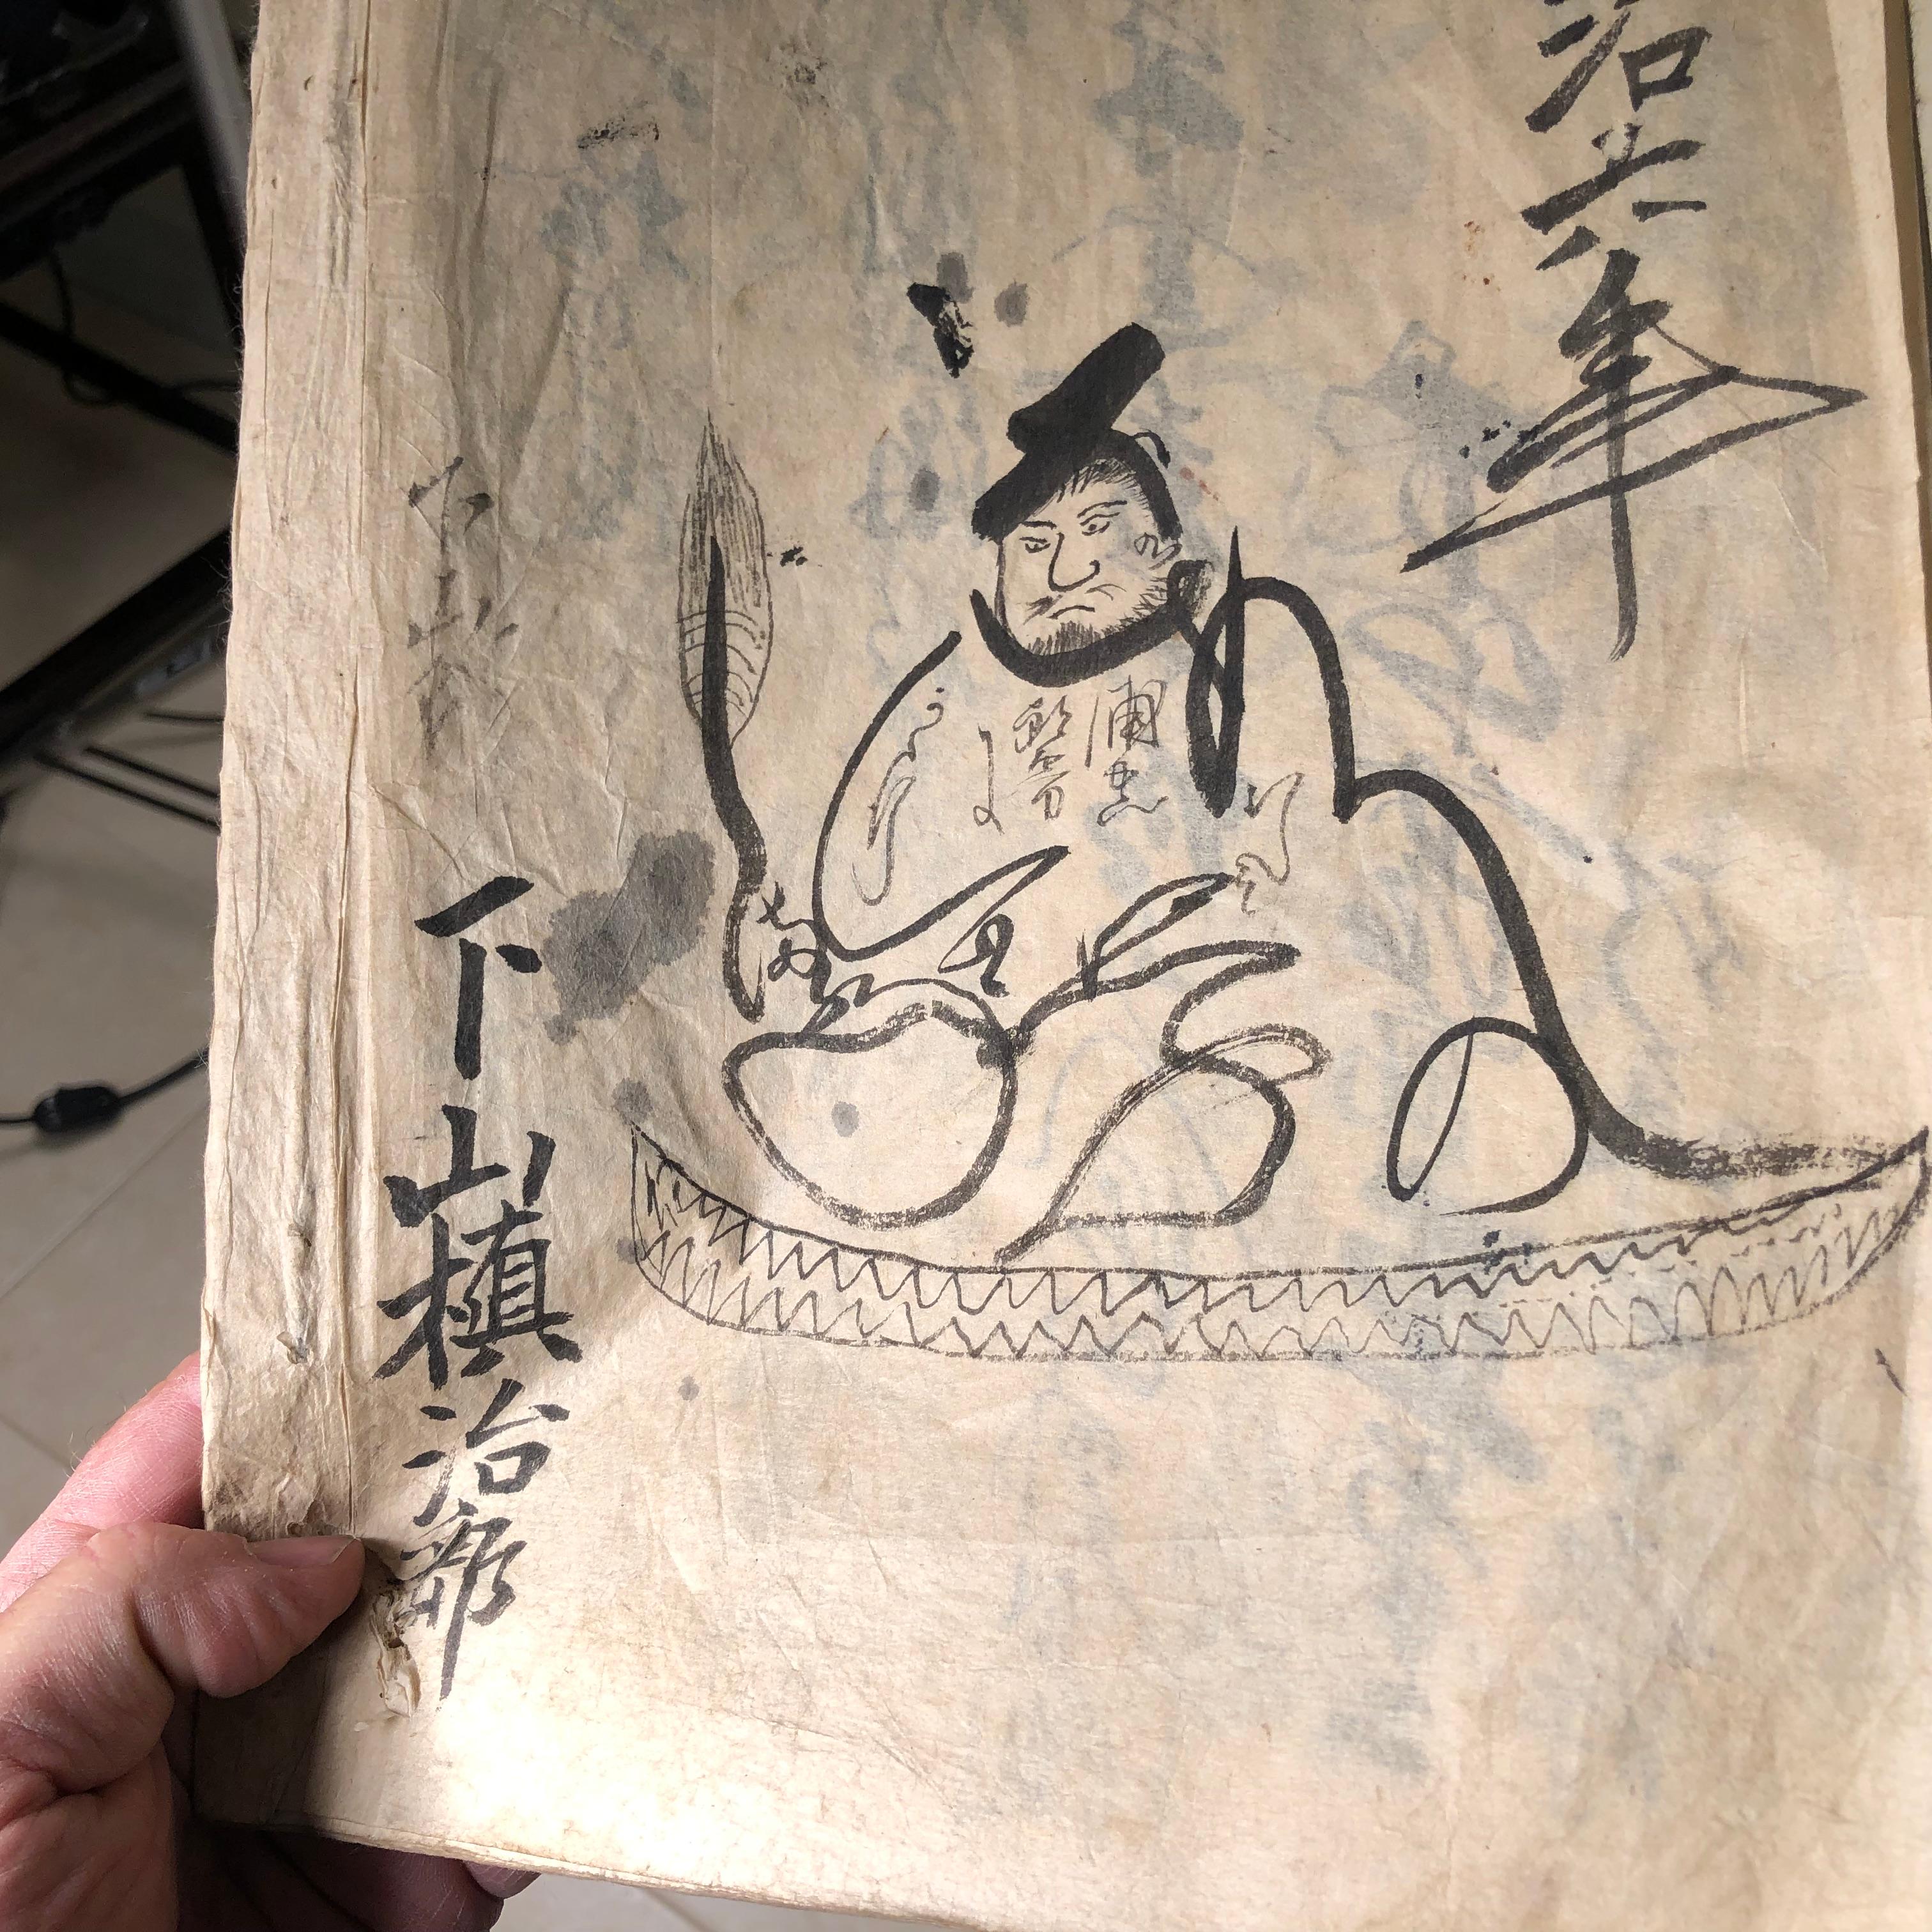 From our recent Japanese Acquisition Travels

We recently snapped up this primer book on Japanese sumi ink calligraphy- a truly rare find dating to the 19th century. Its unique title page and back cover , still in good condition, signals an